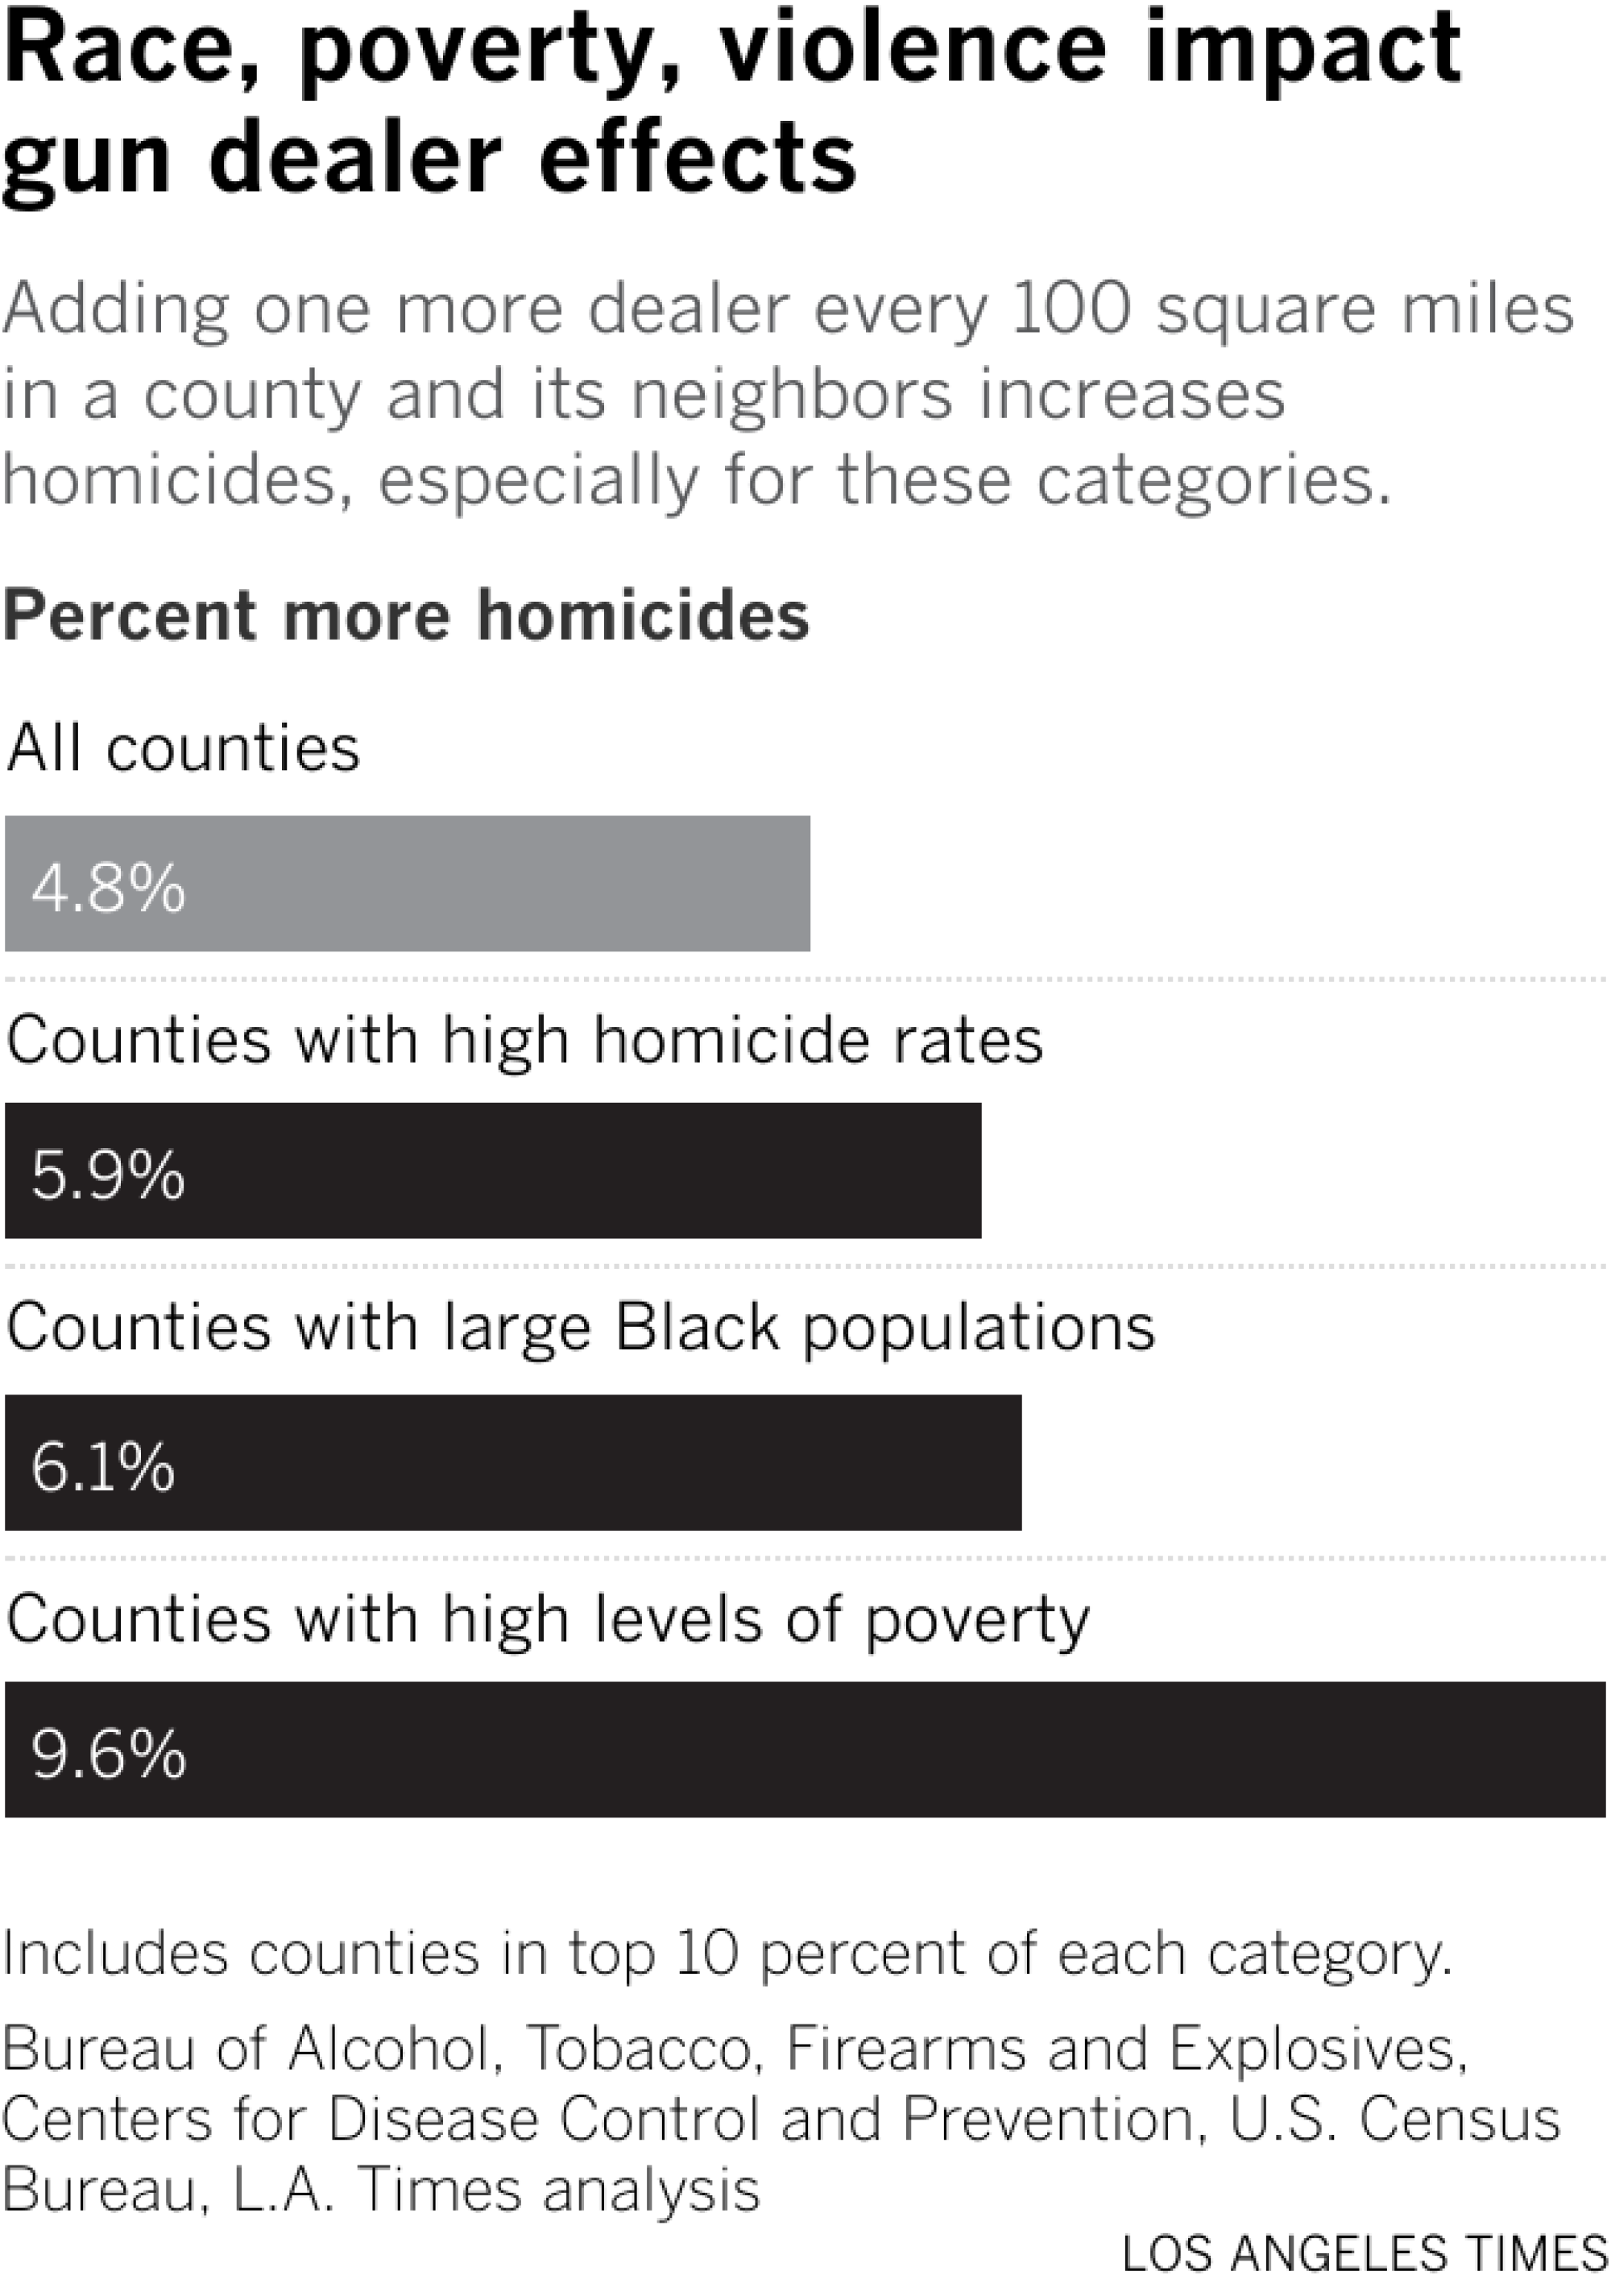 Bar chart showing that one additional gun dealer every 100 square miles can increase homicides by 4.8 percent, but race, poverty and existing violence at most double the effect.